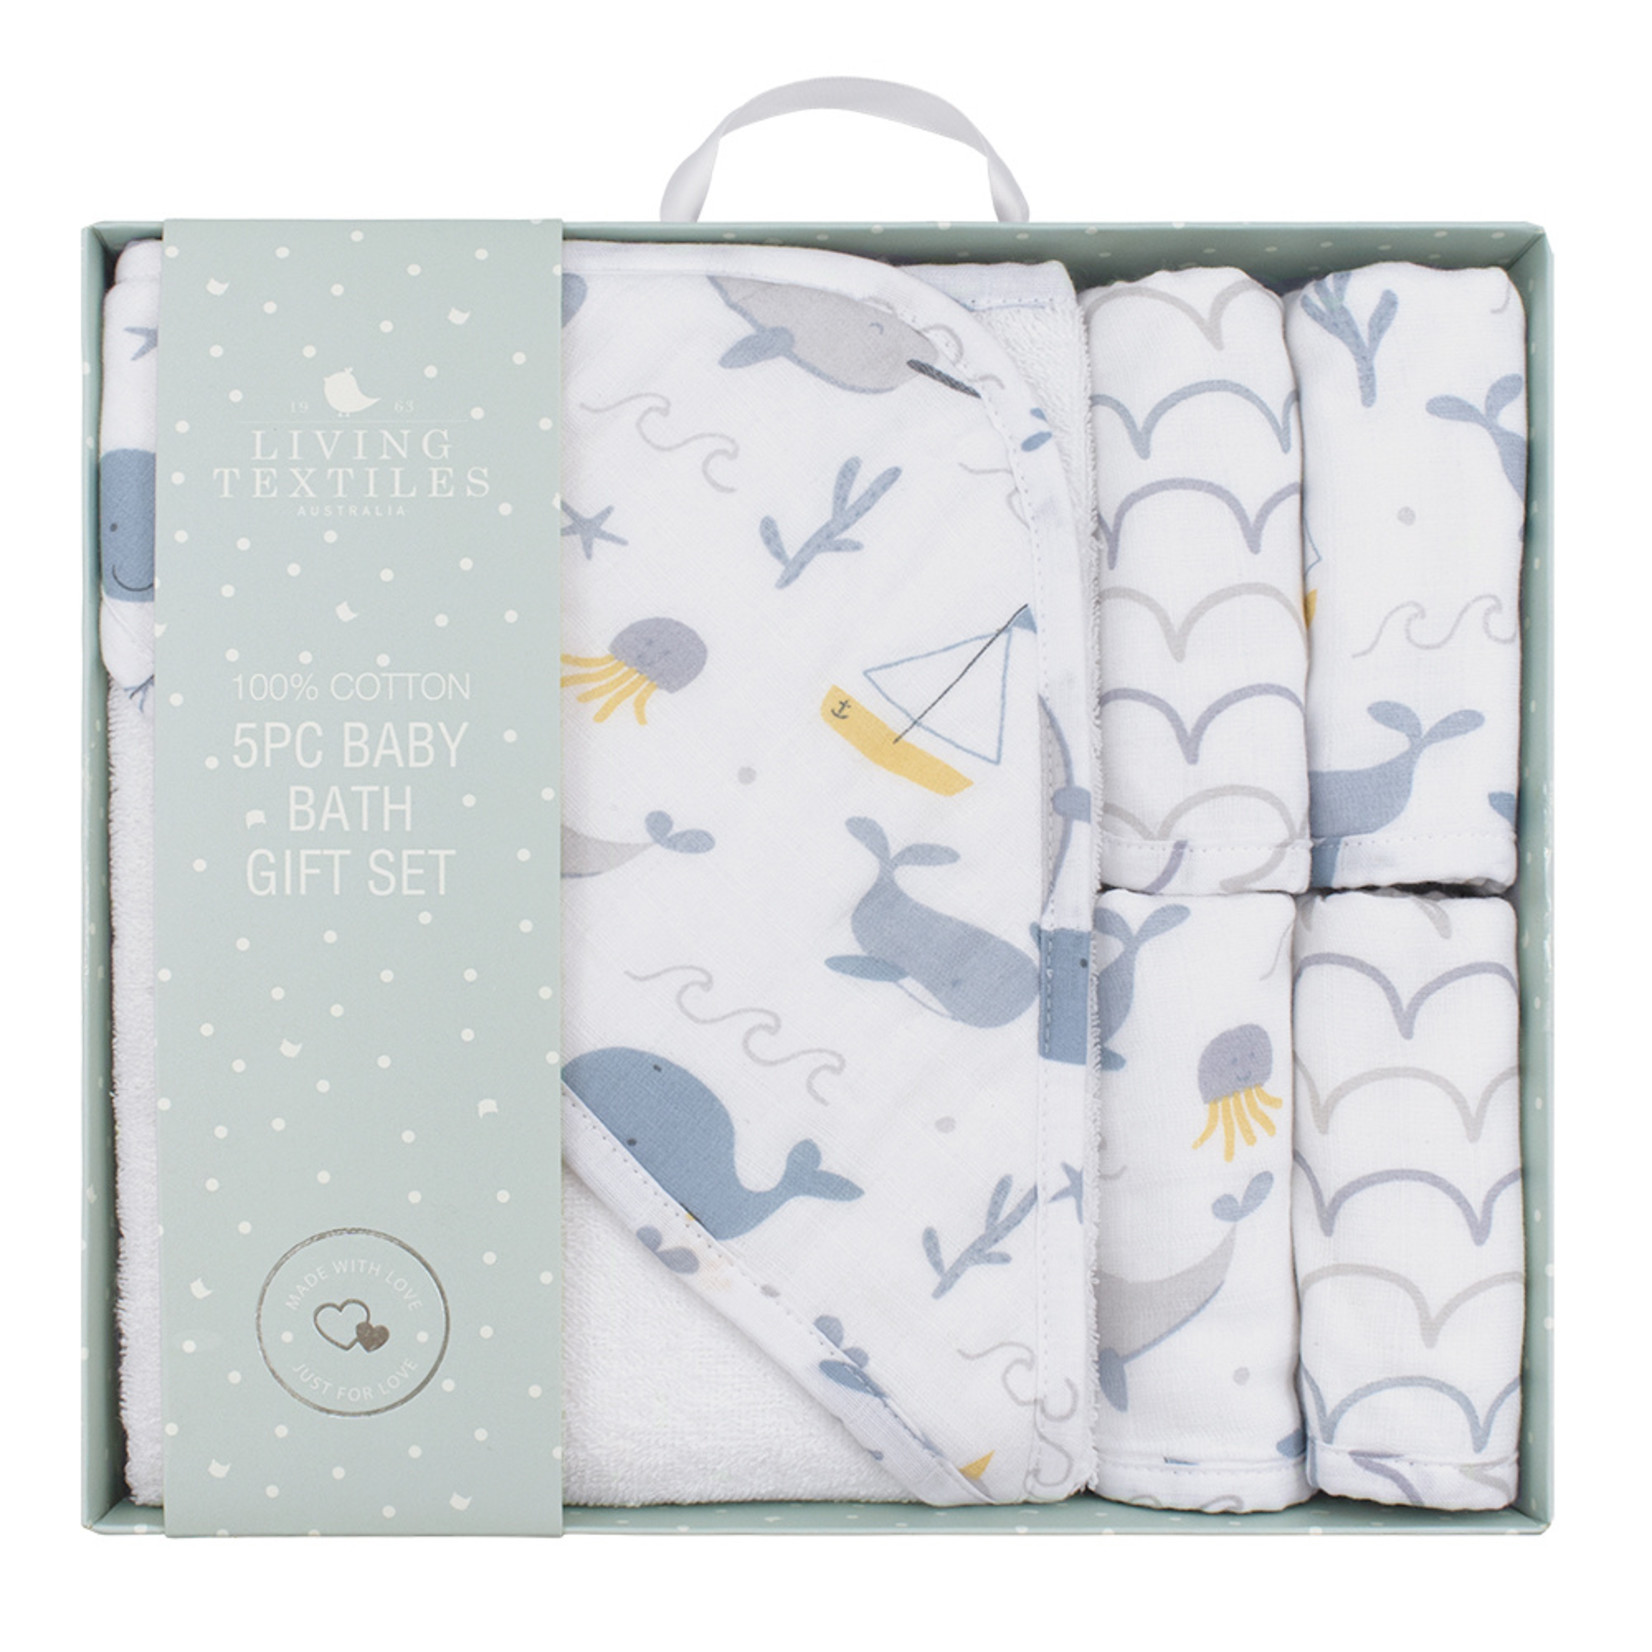 Living Textiles 5-piece Bath Gift Set-Whale of a Time